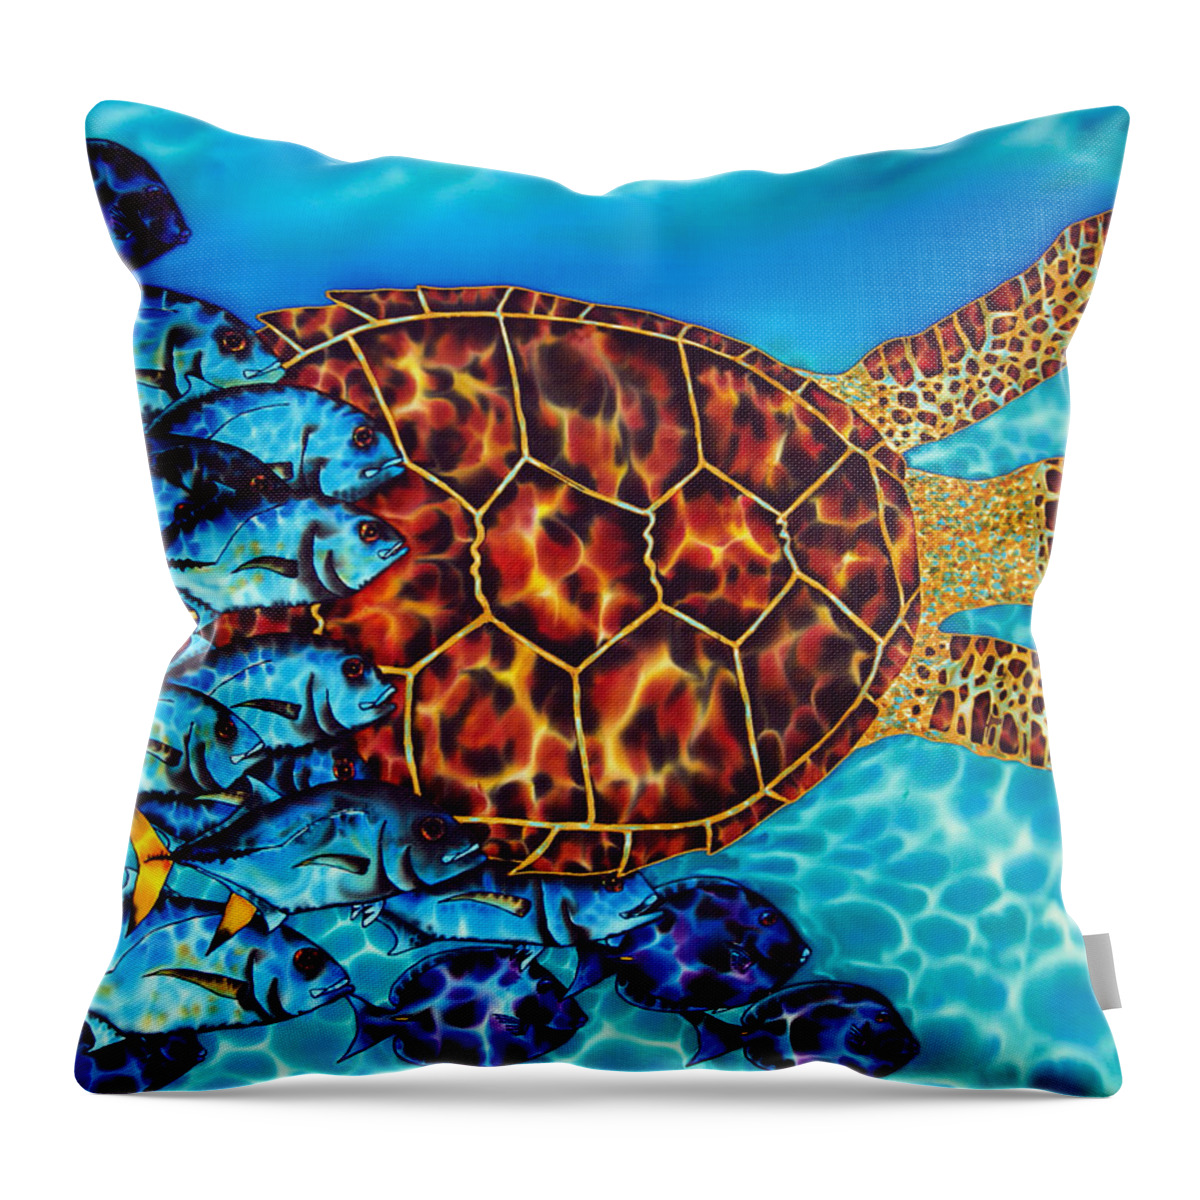 Turtle Throw Pillow featuring the painting Sea Turtle by Daniel Jean-Baptiste